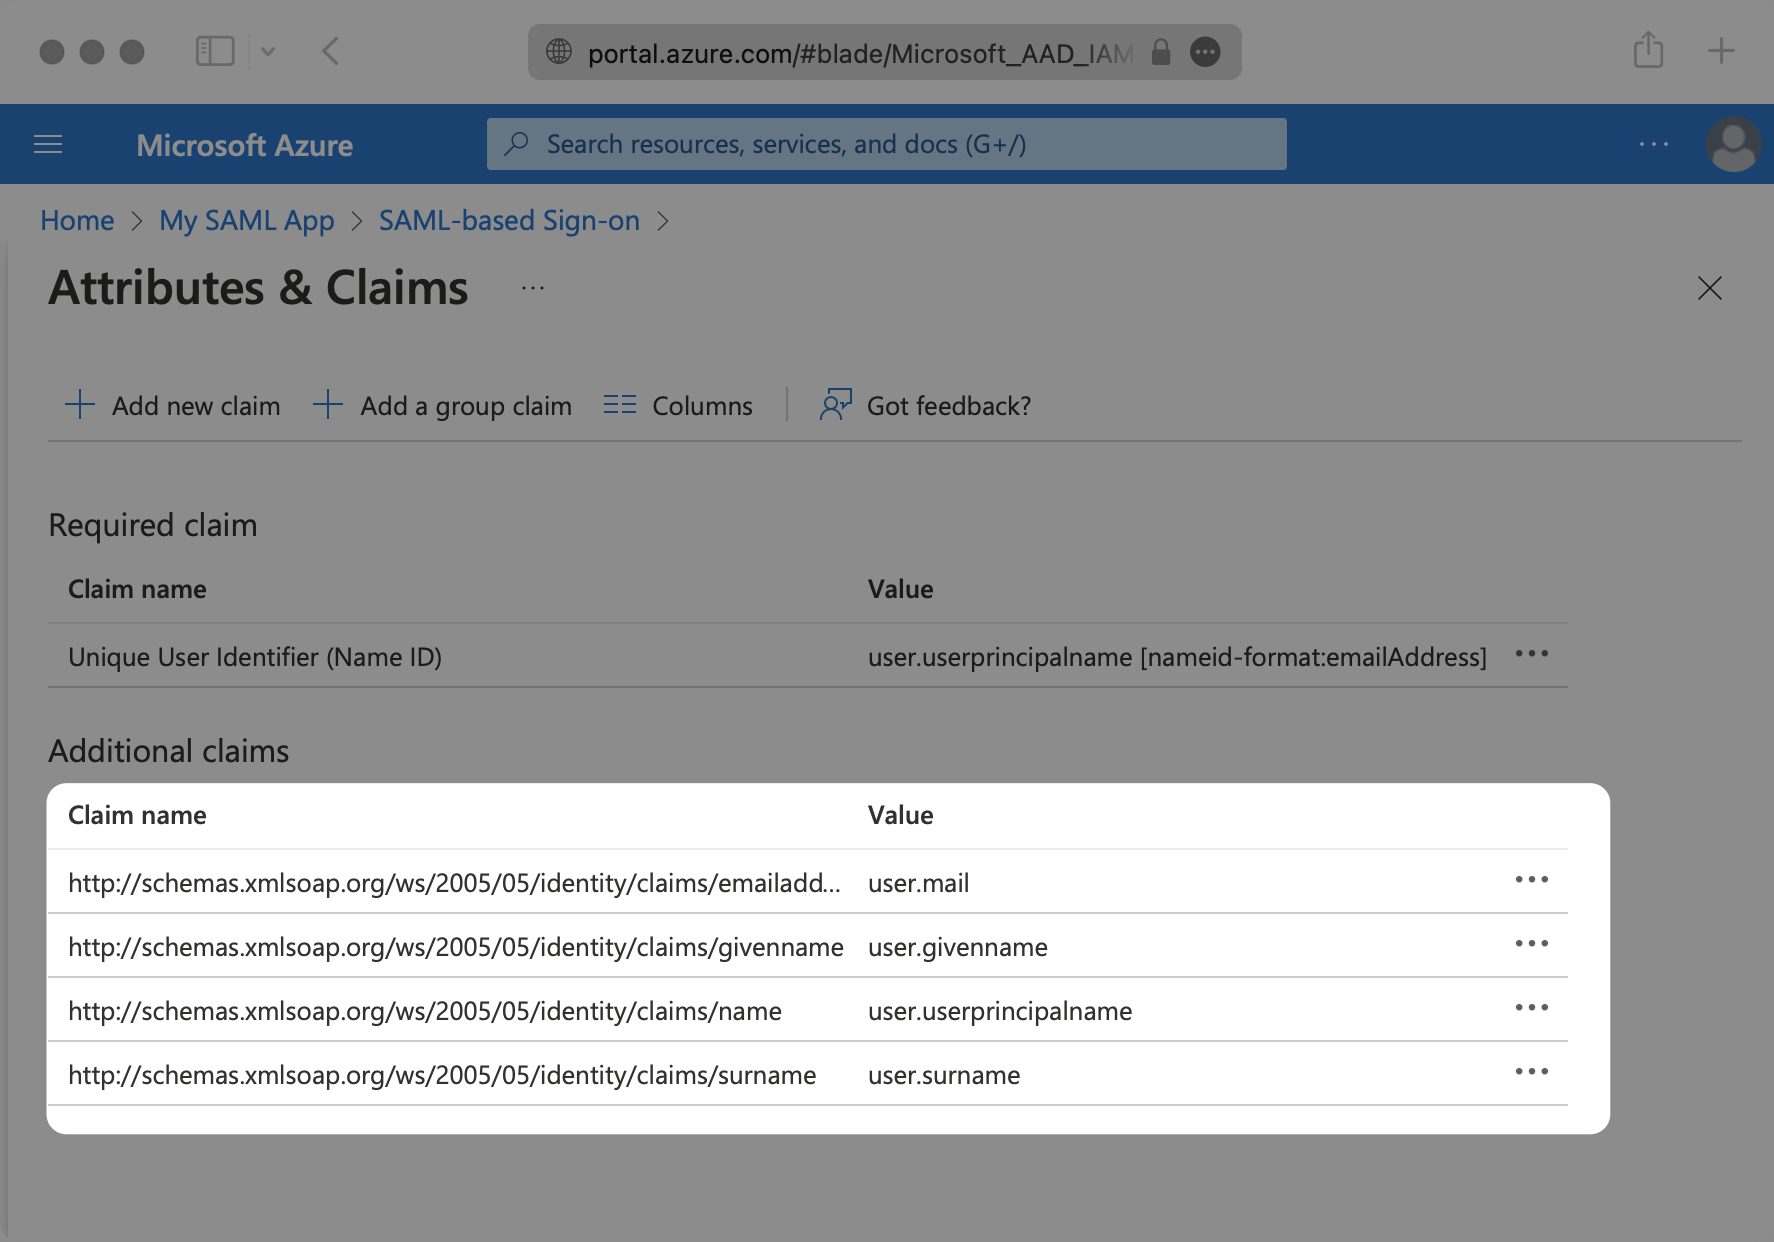 A screenshot showing the "Attribute & Claims" configuration in the Azure dashboard.